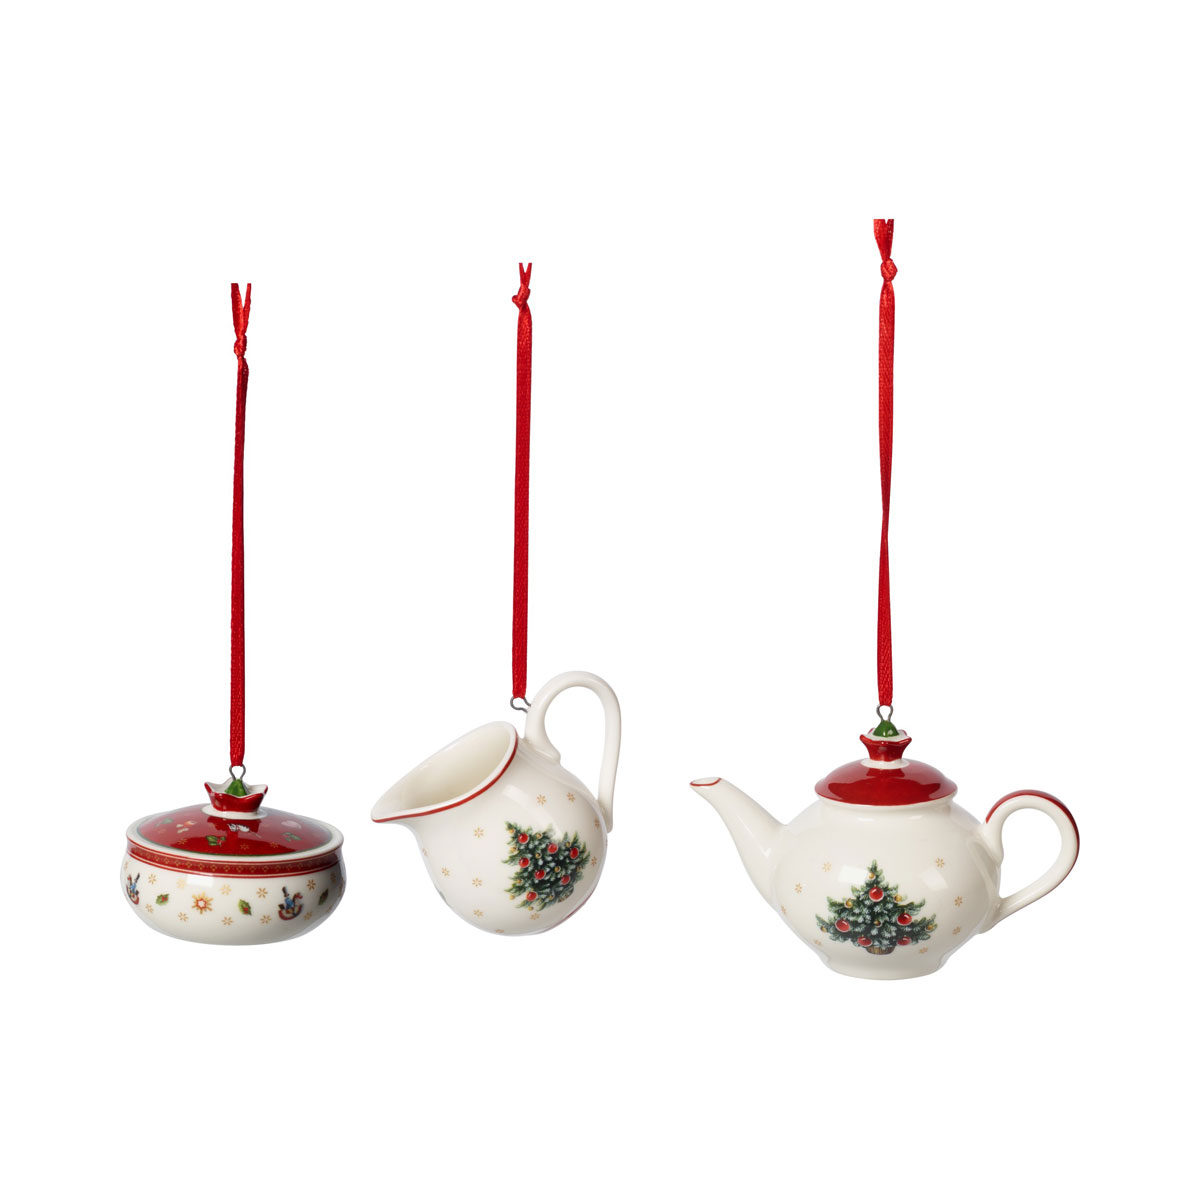 Villeroy and Boch 2023 Toys Delight Decoration Coffeeset Ornaments, Set of 3